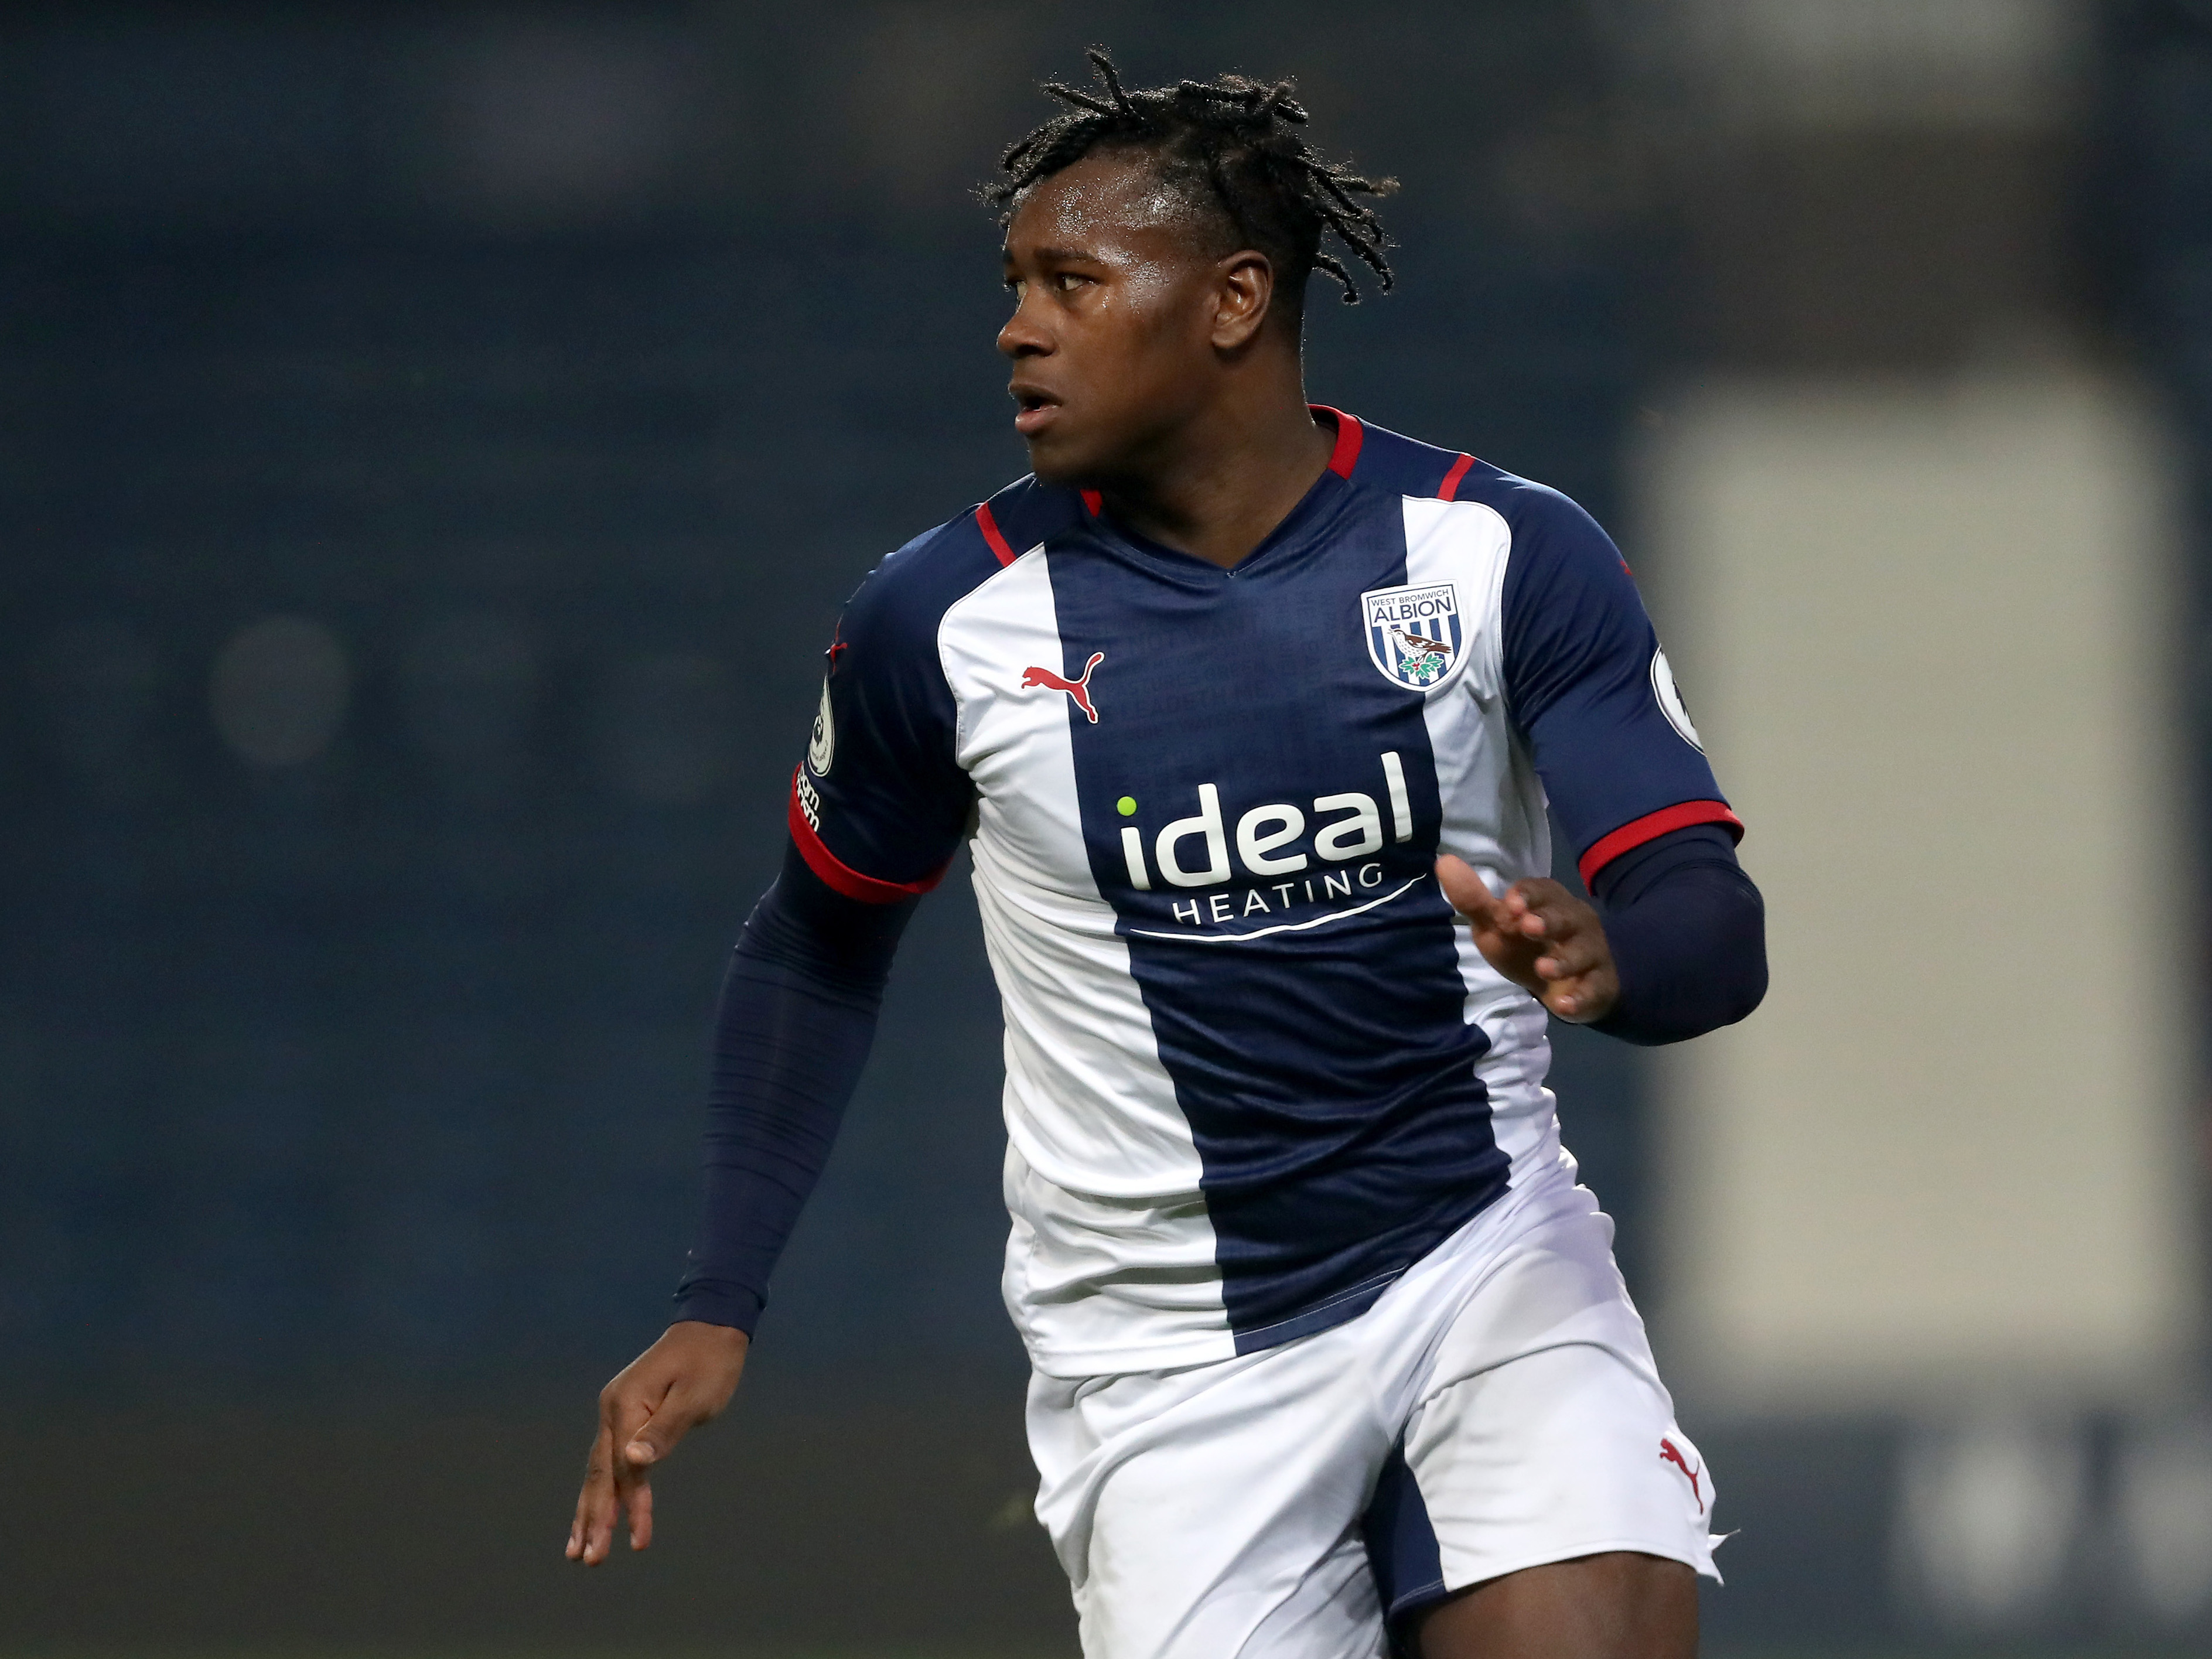 Reyes Cleary scored for Albion's 18s against Fulham